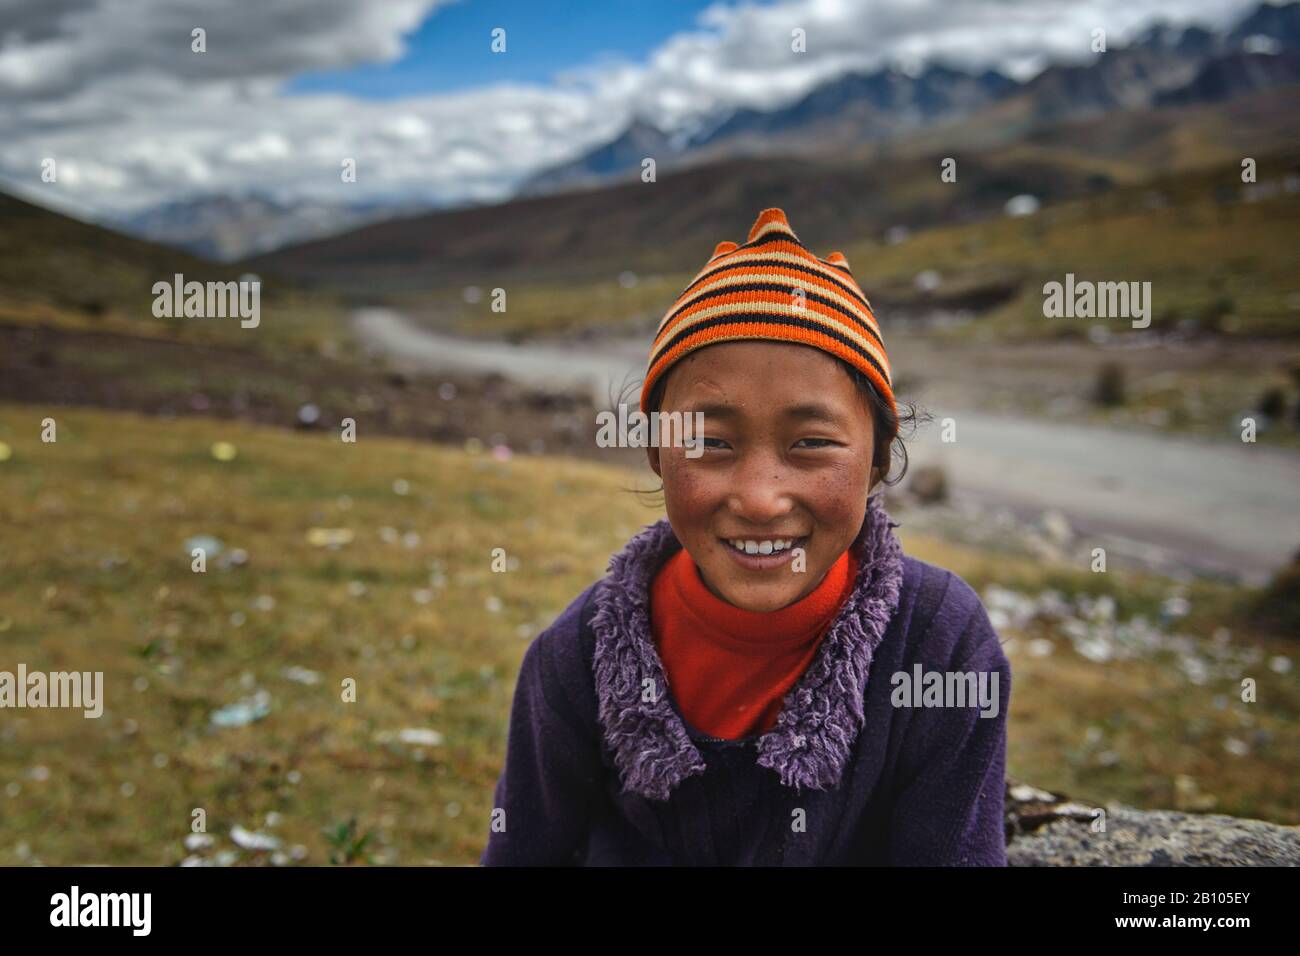 Tibetan kids from nomad families wander around their camp sites during day and greet their visitors. Tibetan plateau Stock Photo